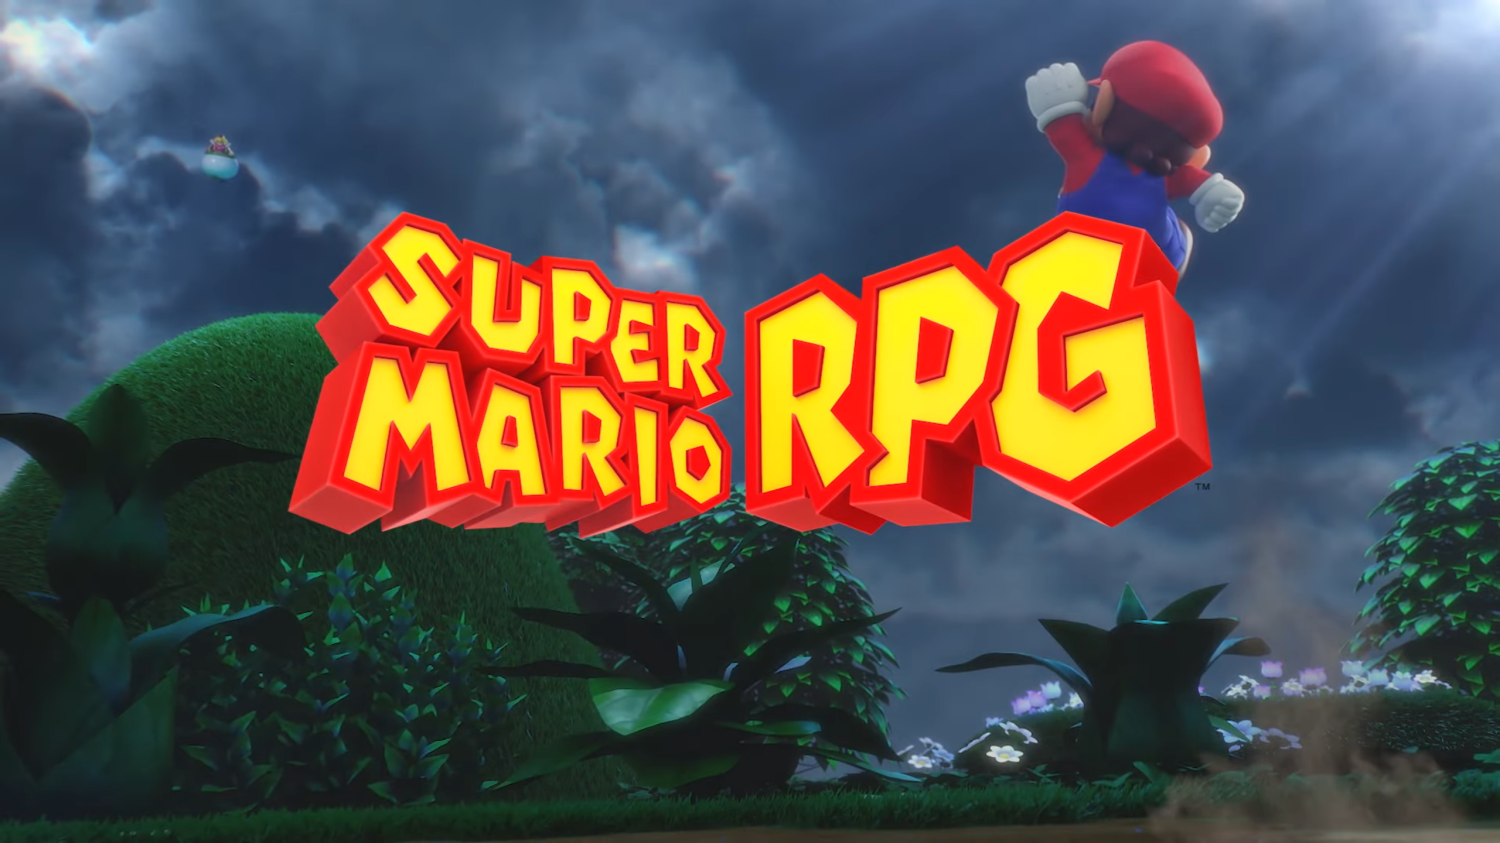 Super Mario Bros. Wonder, Super Mario RPG and Many More Games Announced for Nintendo  Switch